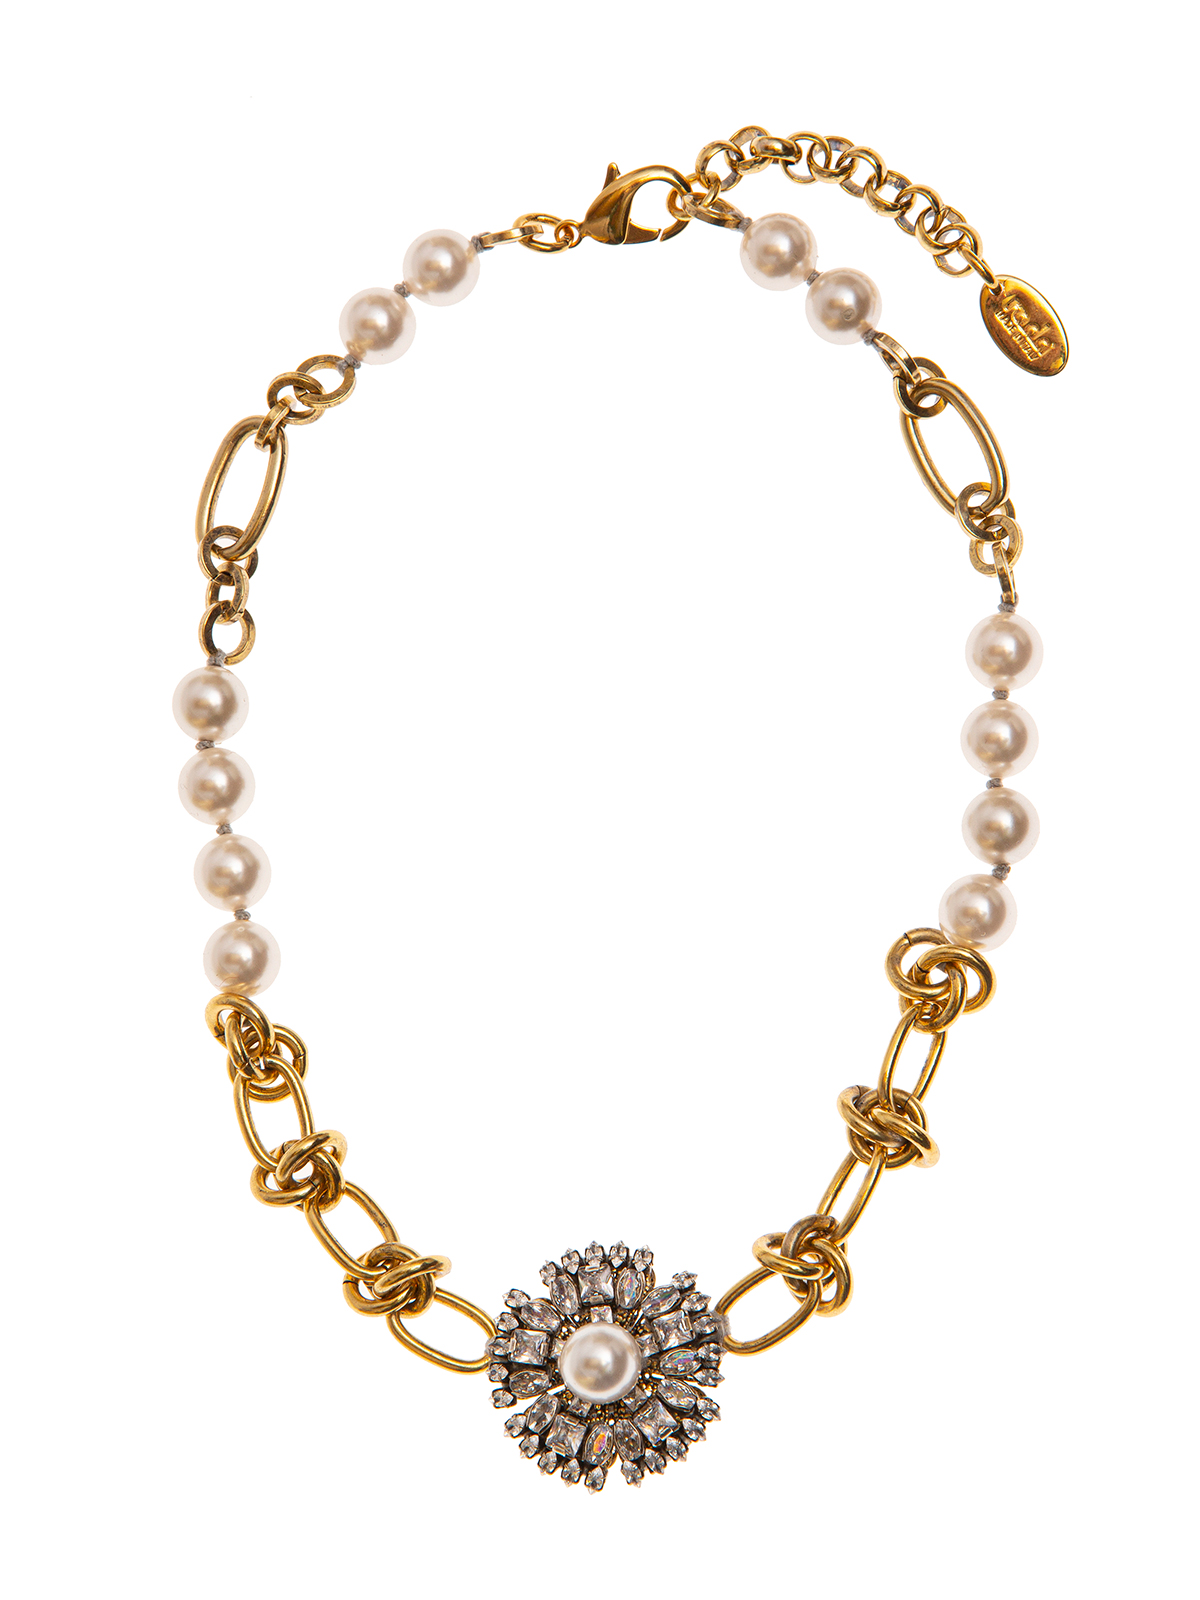 Chain and pearl necklace with crystal flower and central pearl